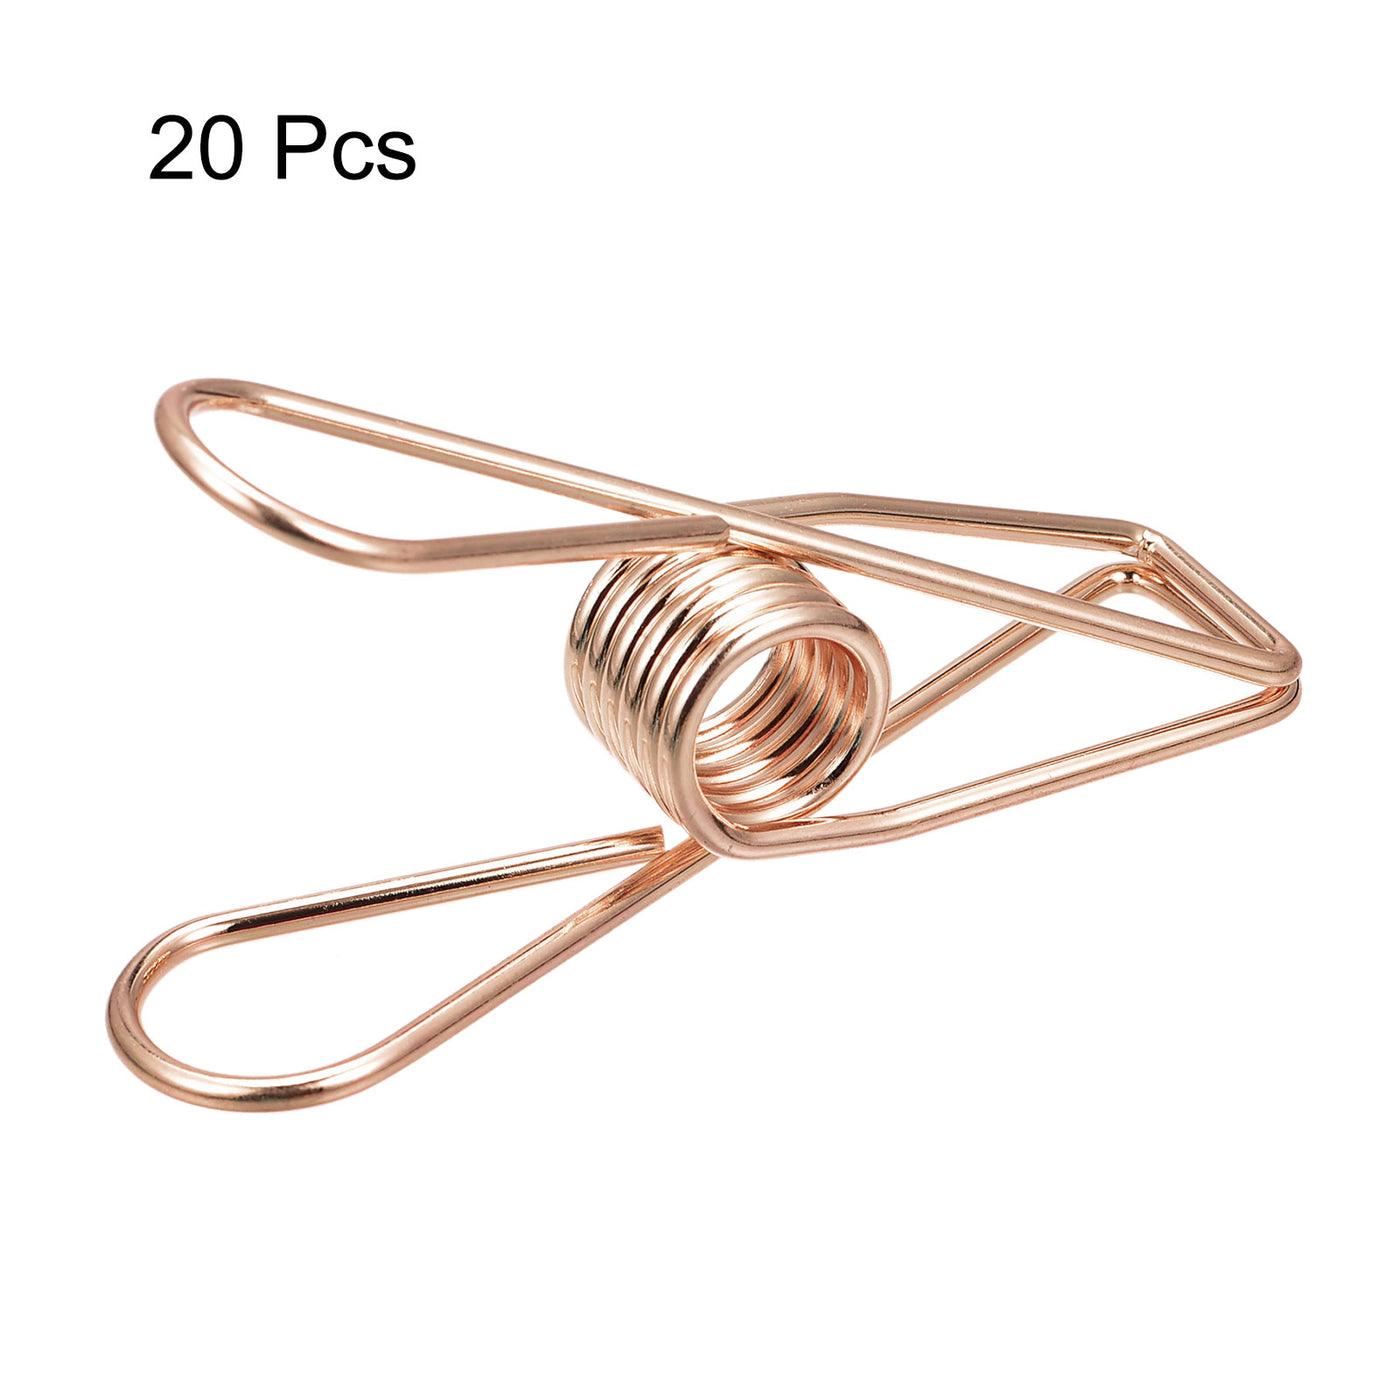 uxcell Uxcell Tablecloth Clips, 70mm Carbon Steel Clamps for Fix Table Cloth, Rose Gold 20 Pcs